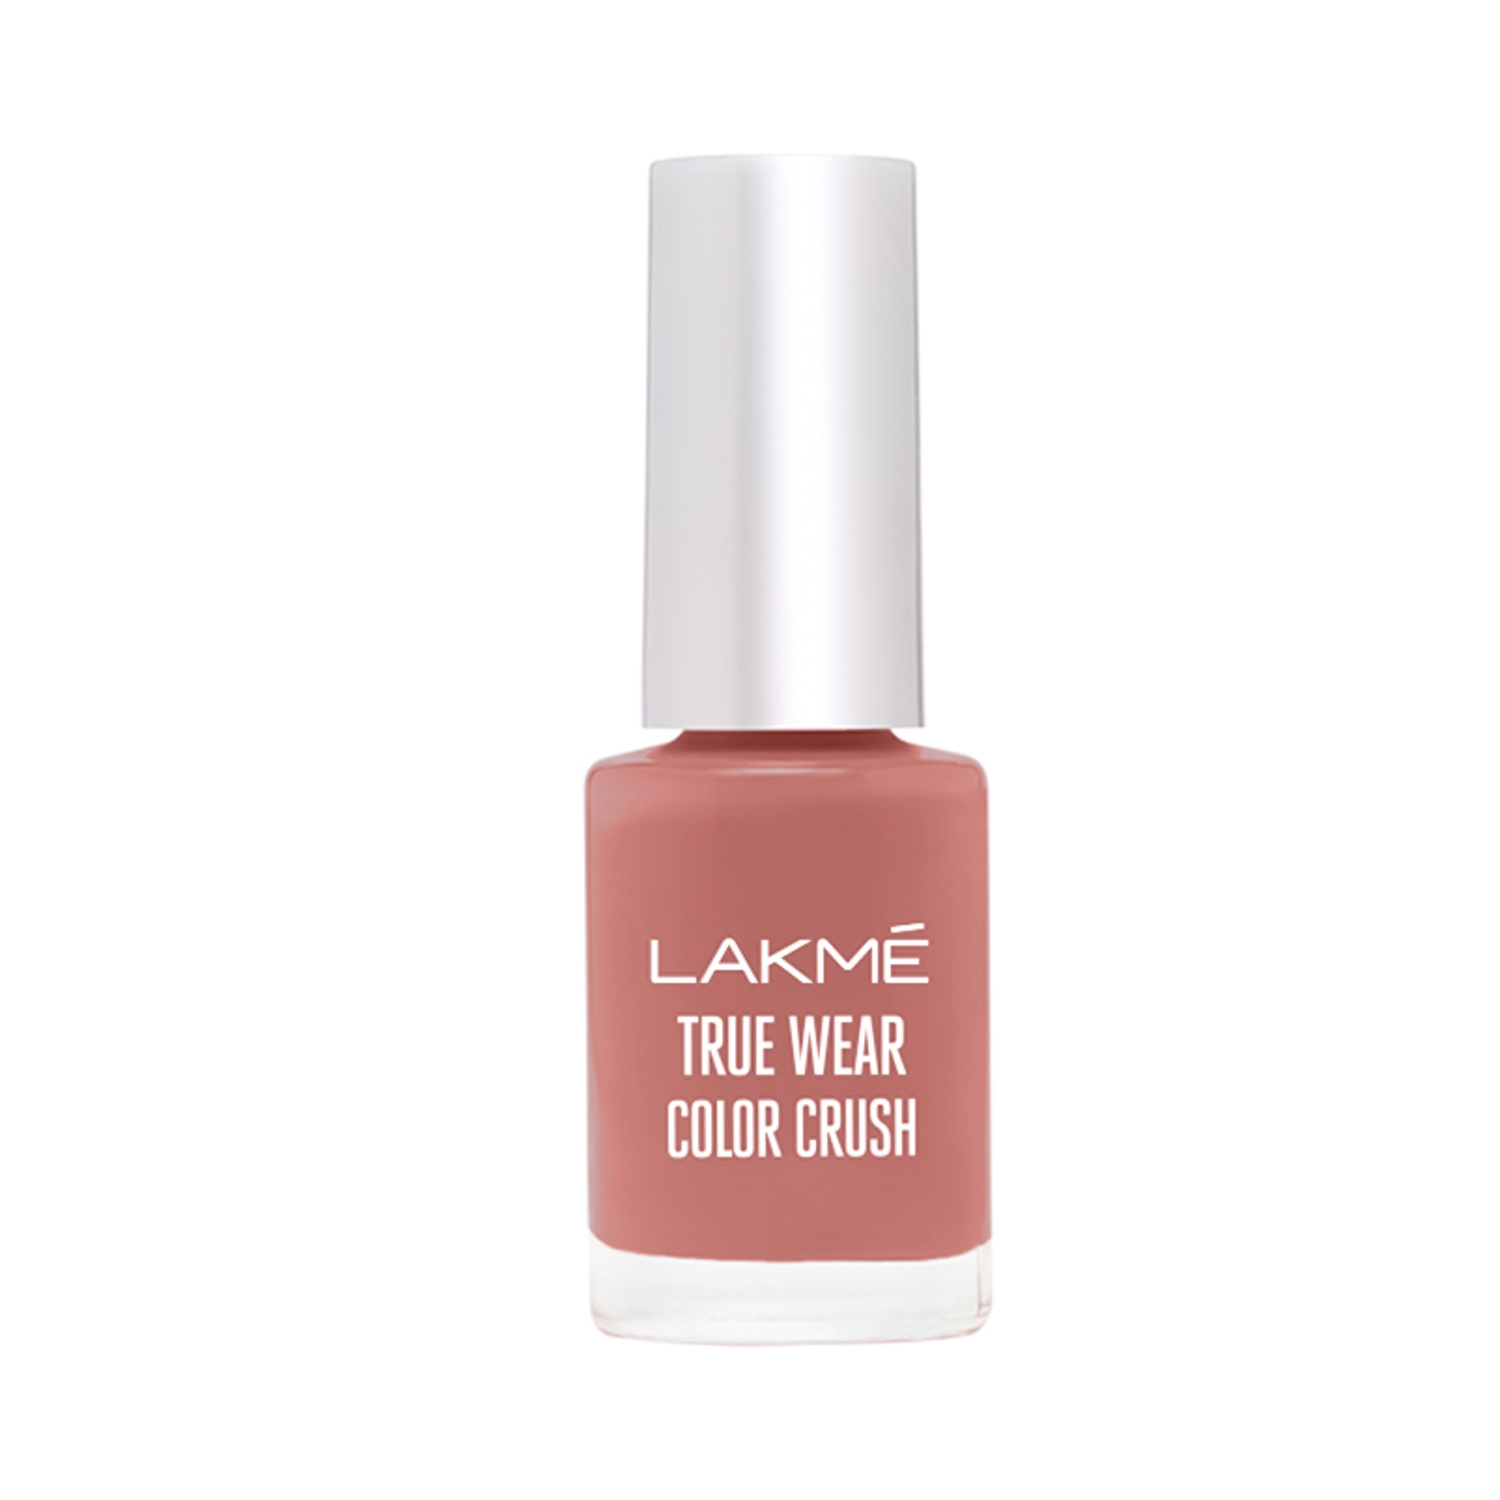 Lakmé True Wear Nail Color Reds & Maroons 401 - Price in India, Buy Lakmé  True Wear Nail Color Reds & Maroons 401 Online In India, Reviews, Ratings &  Features | Flipkart.com